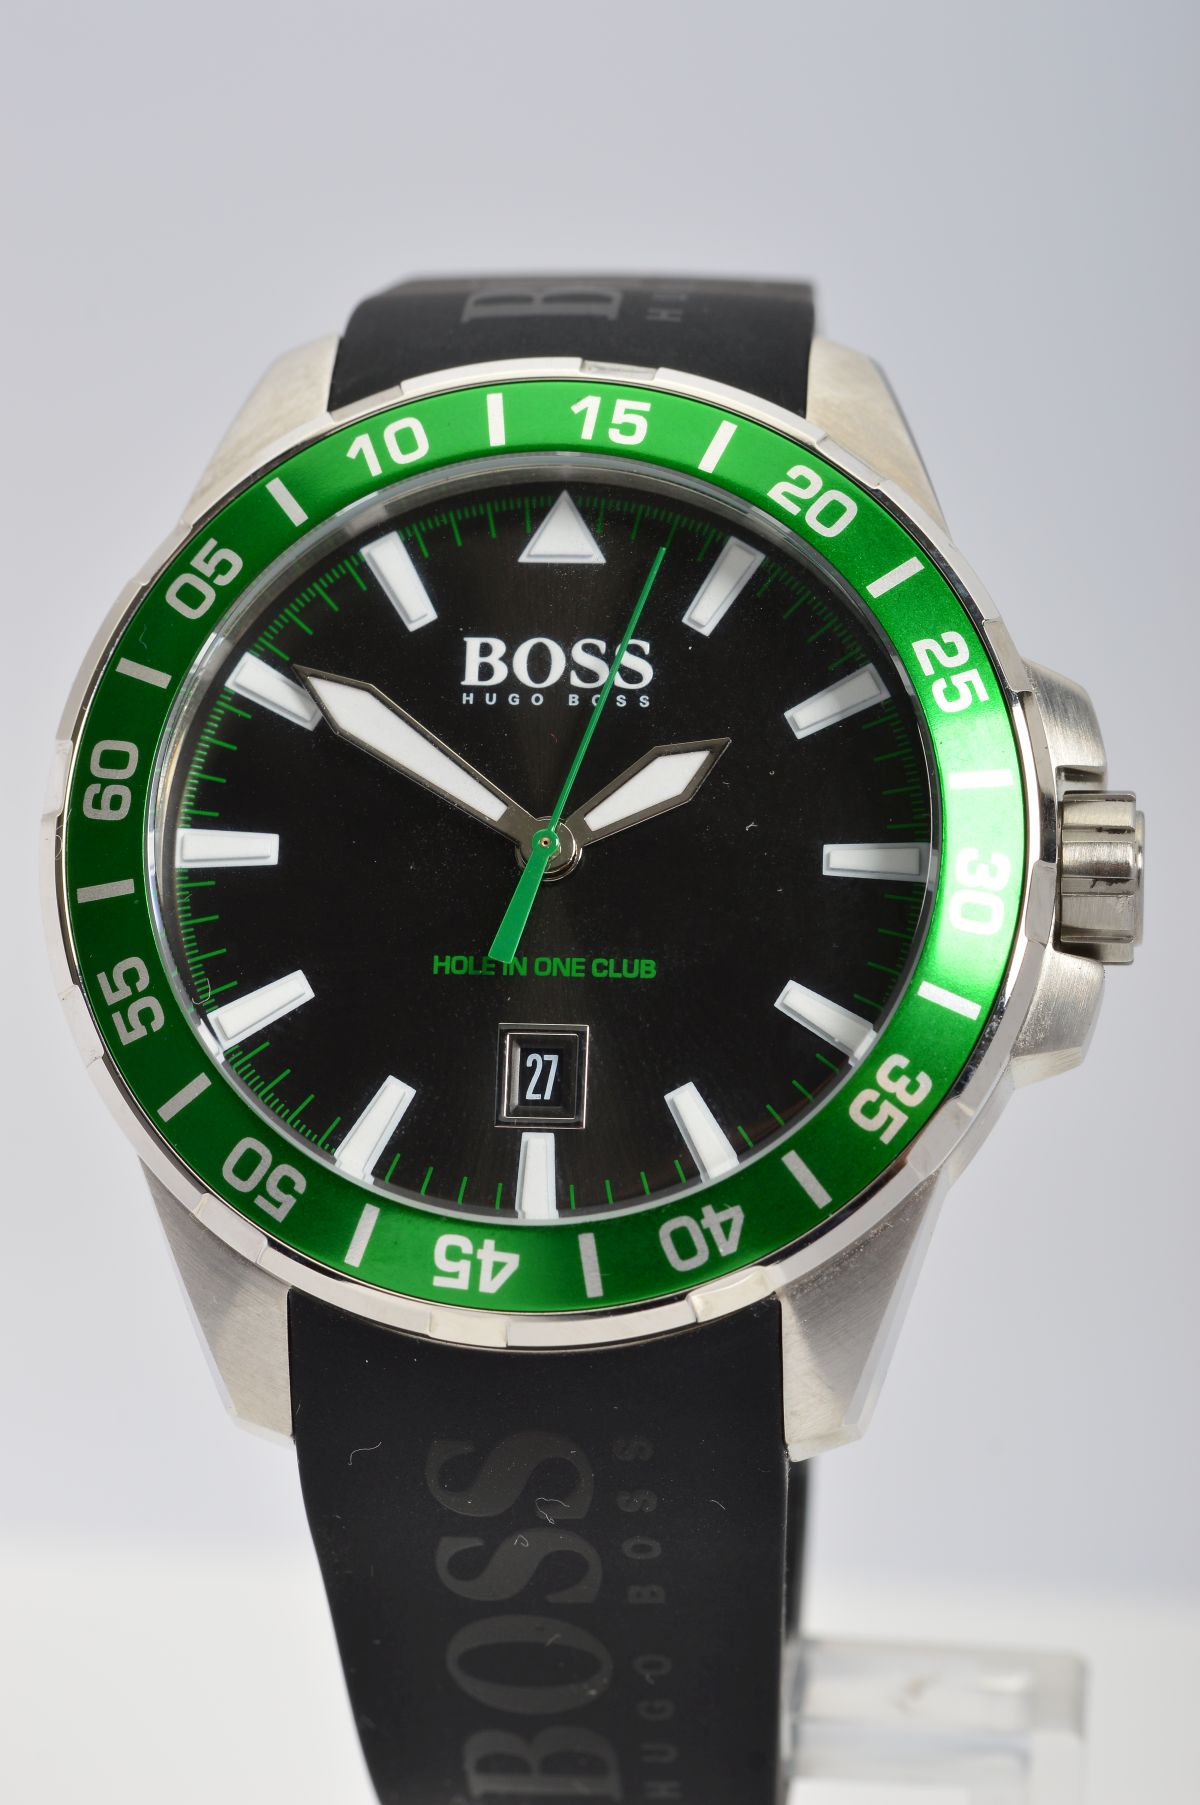 HUGO BOSS 'HOLE IN 1' WATCH, stainless steel case, rubber strap, green unidirectional rotating